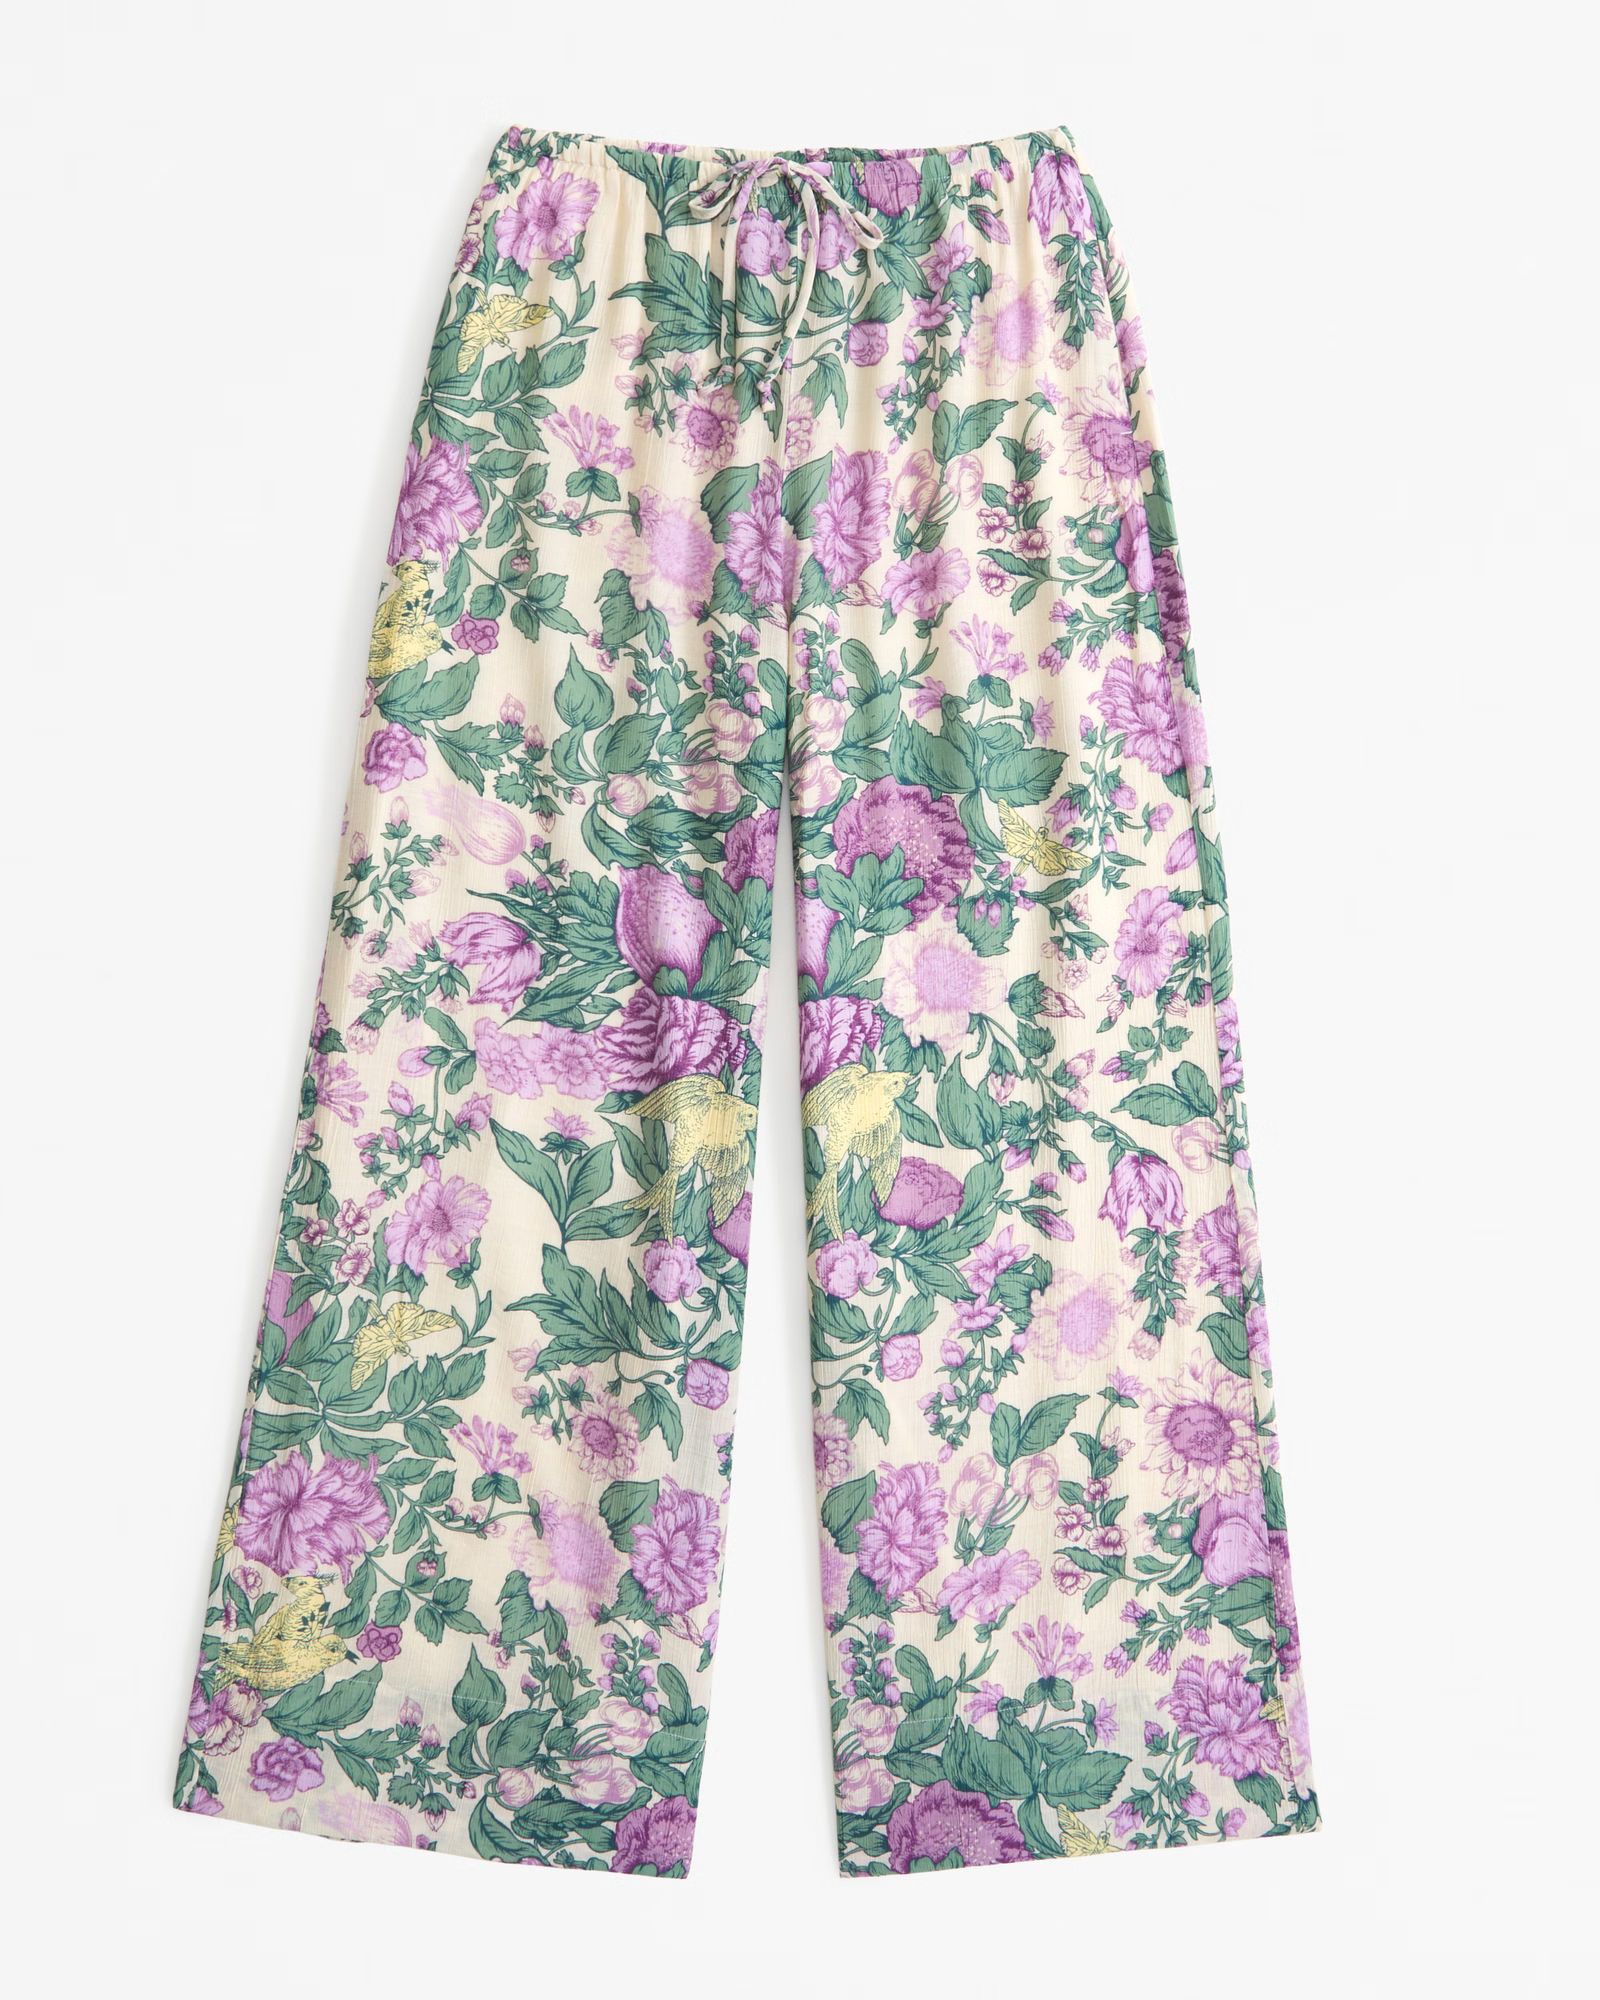 Women's Crinkle Textured Pull-On Palazzo Pant | Women's Bottoms | Abercrombie.com | Abercrombie & Fitch (US)